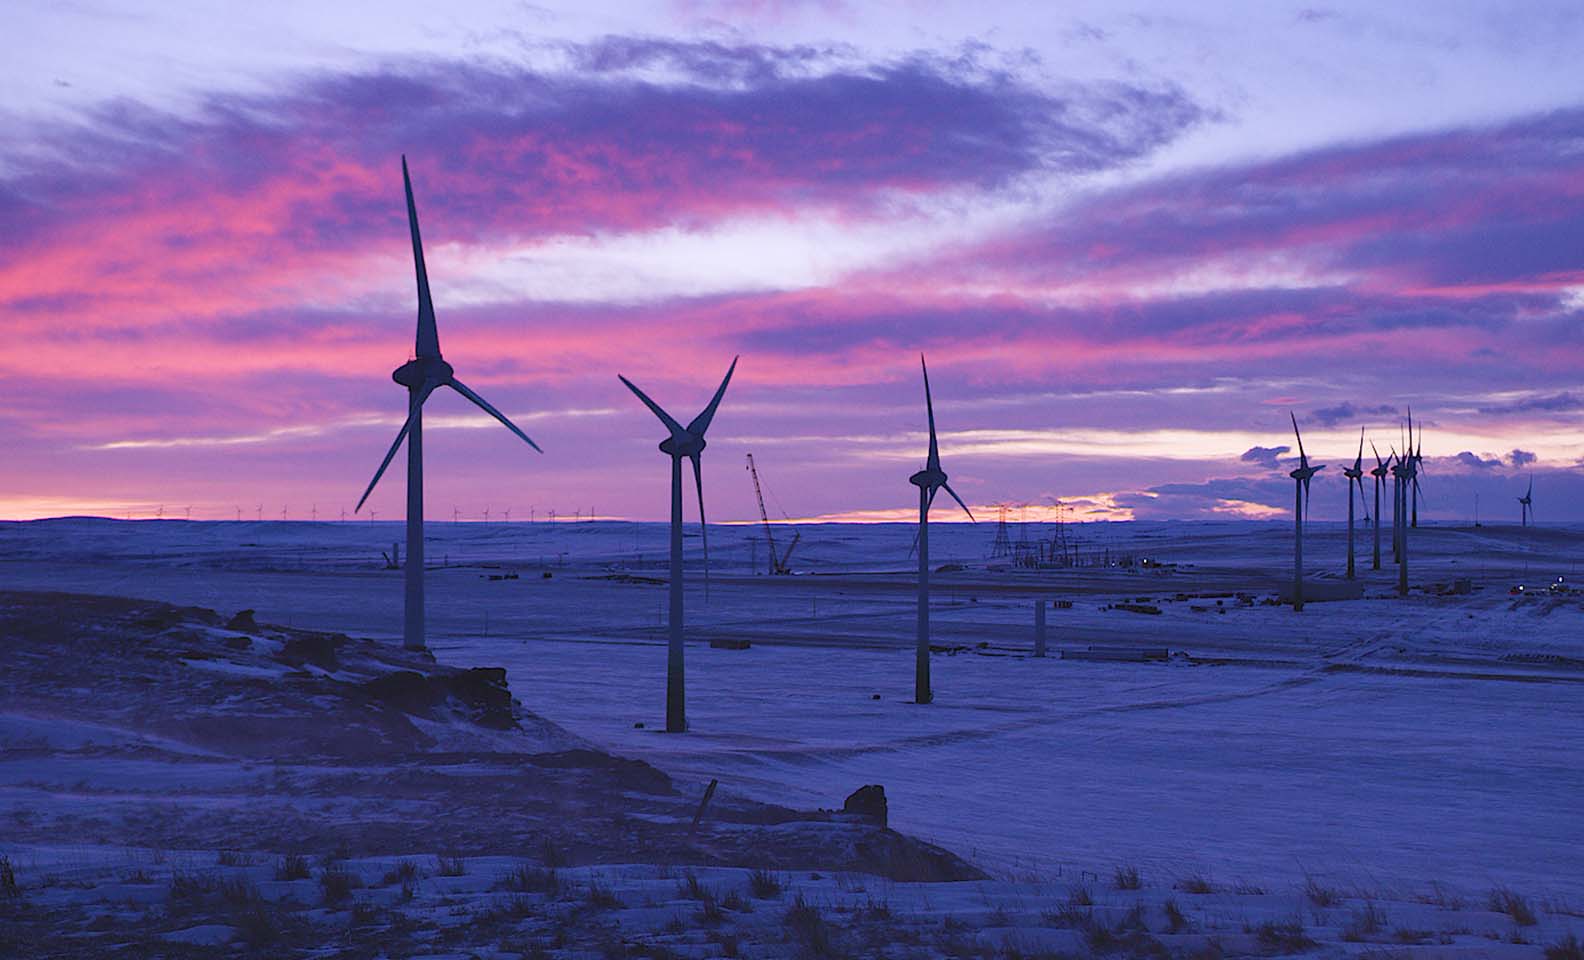 Wind turbines at sunset over snowy landscape